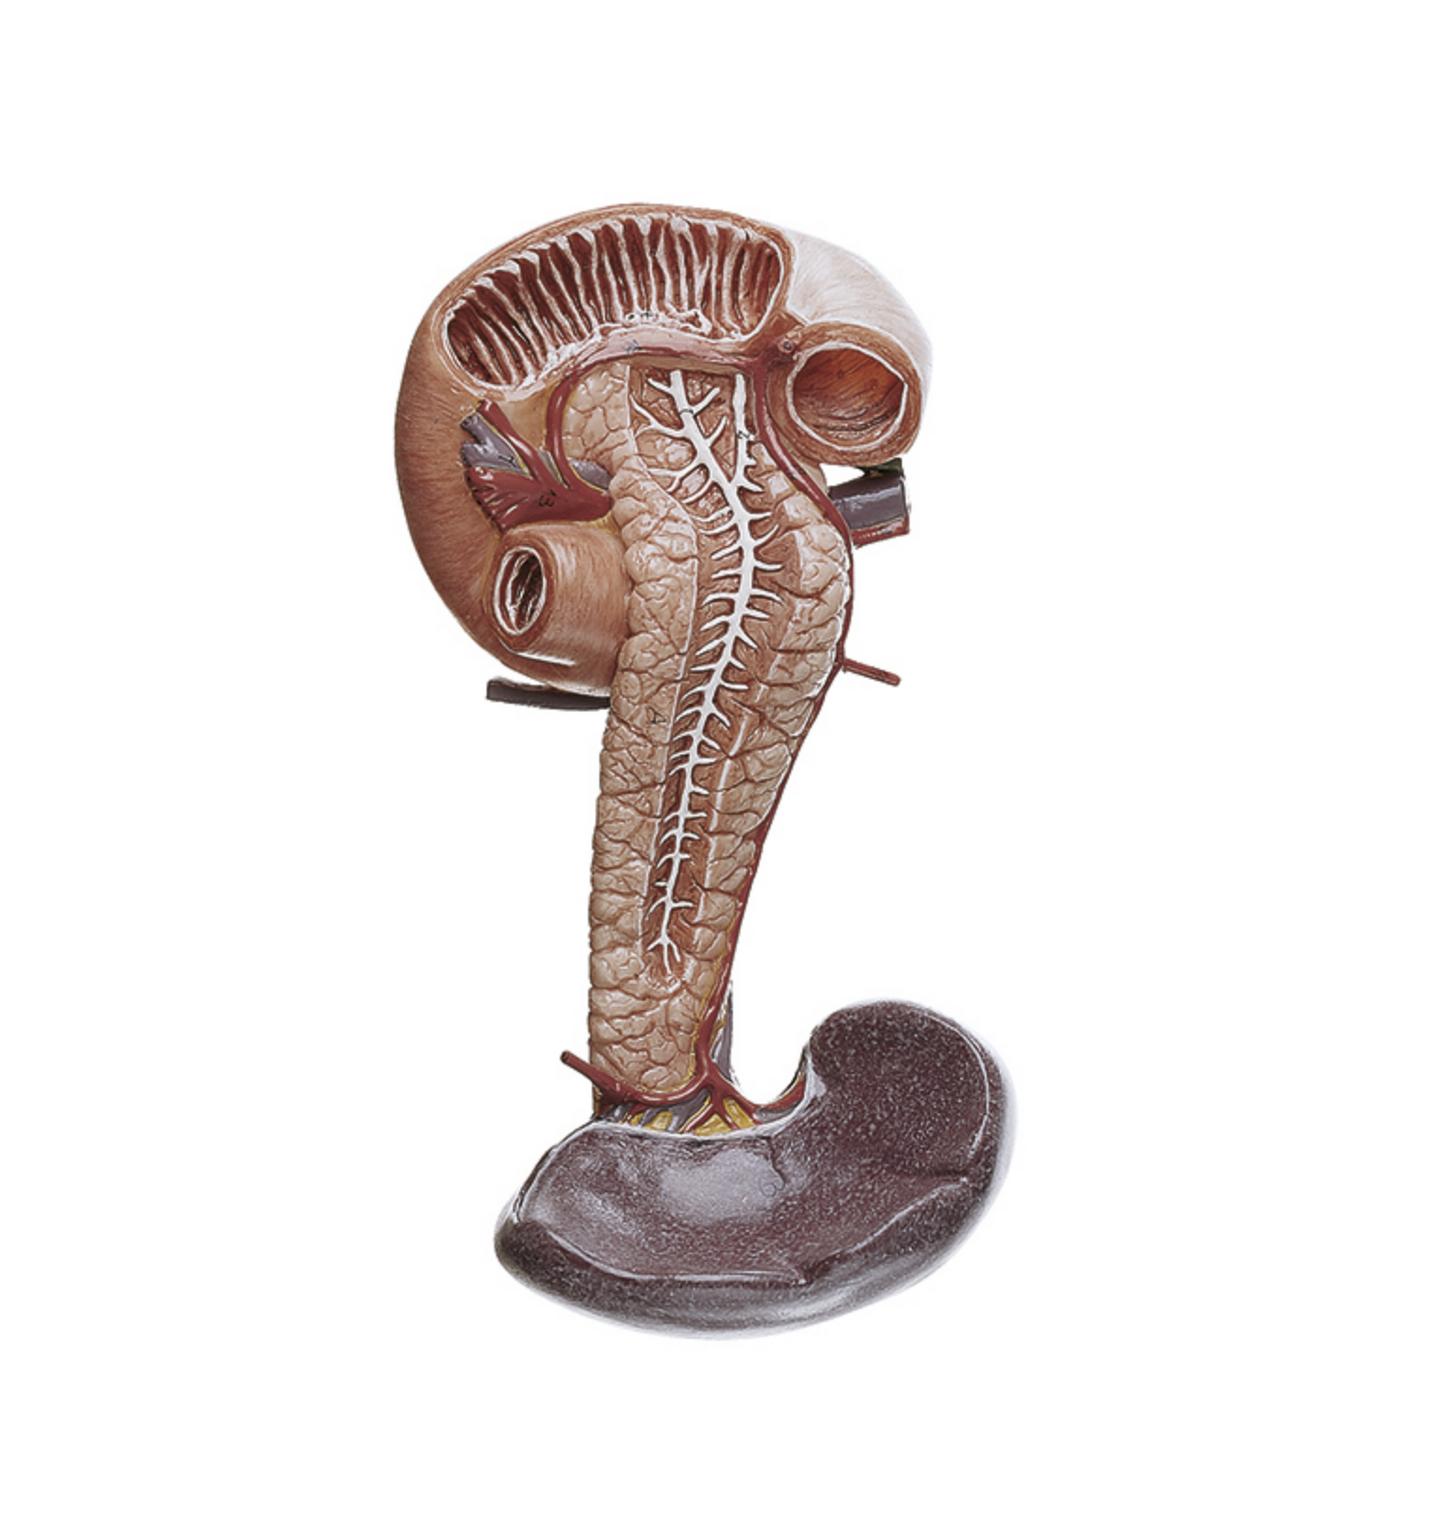 Model of pancreas with spleen and duodenum